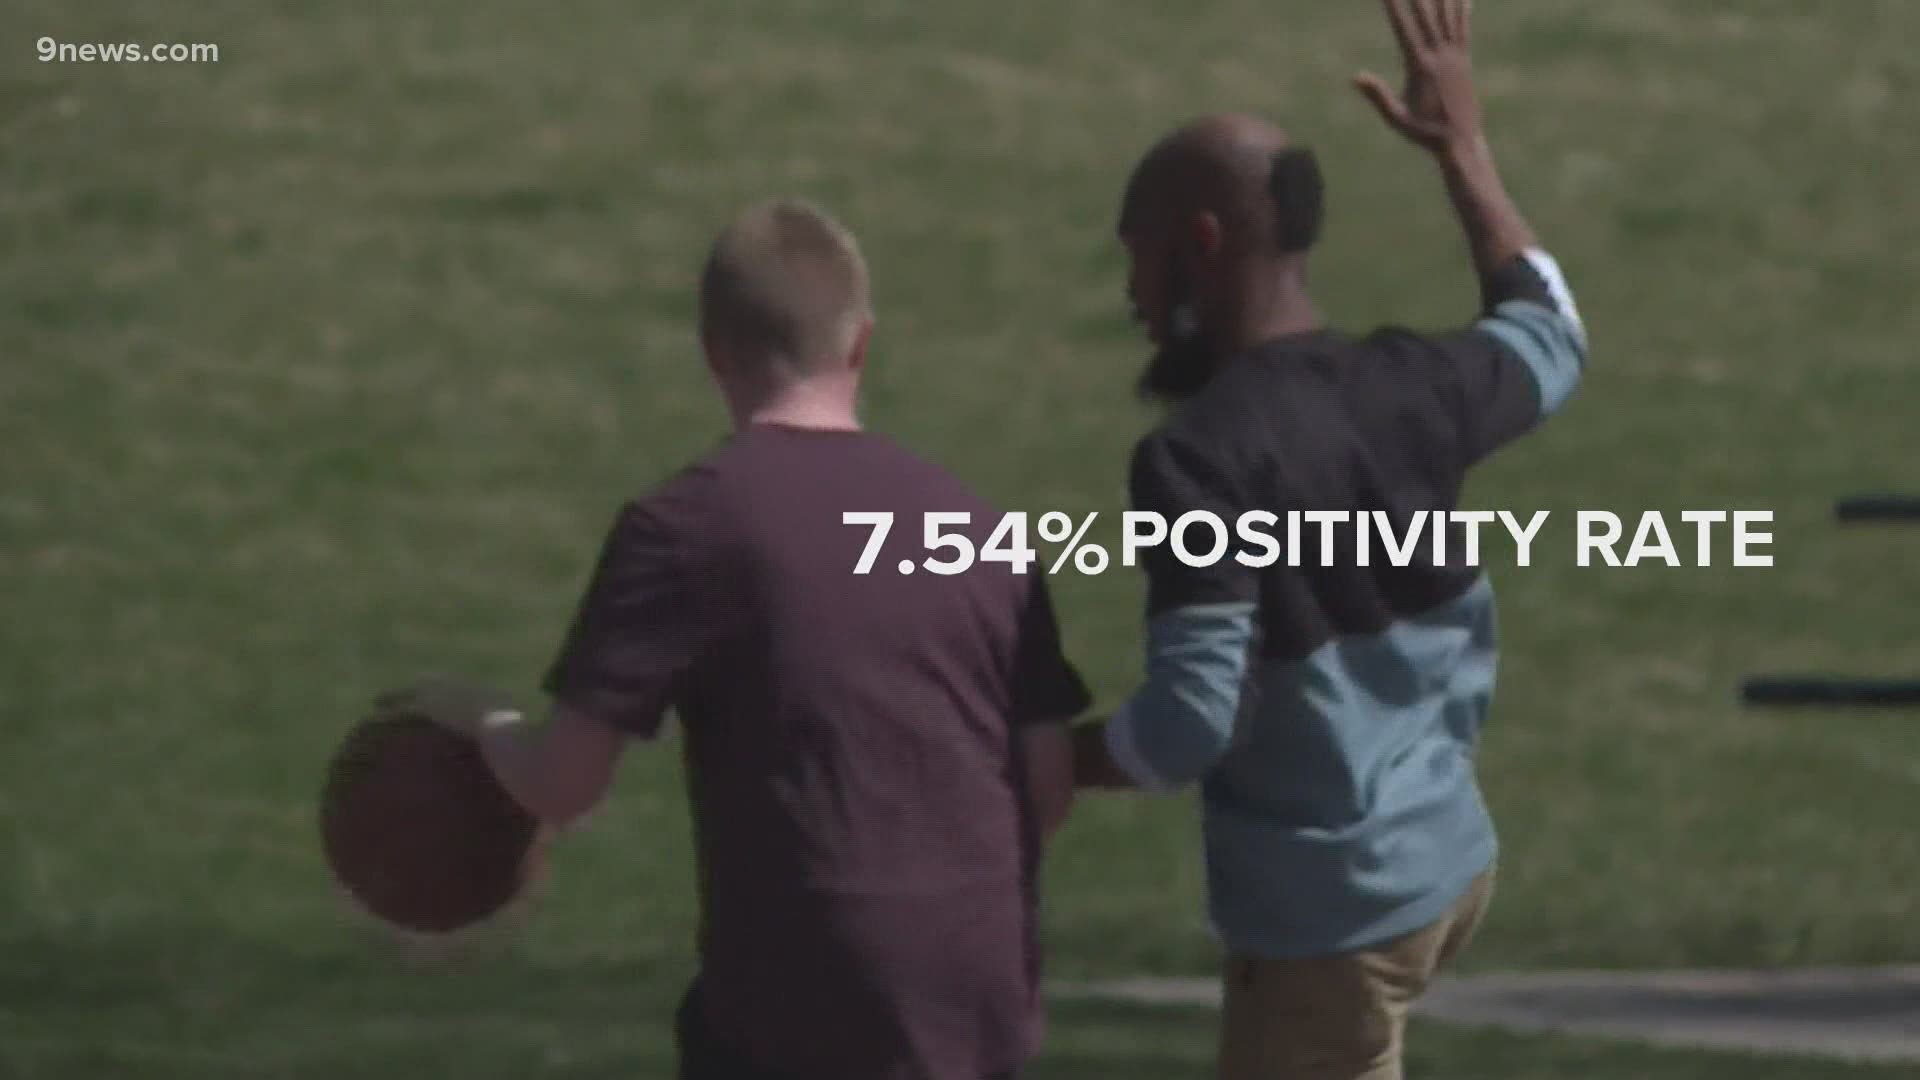 The state is seeing a 6.4% 7-day average positivity rate.